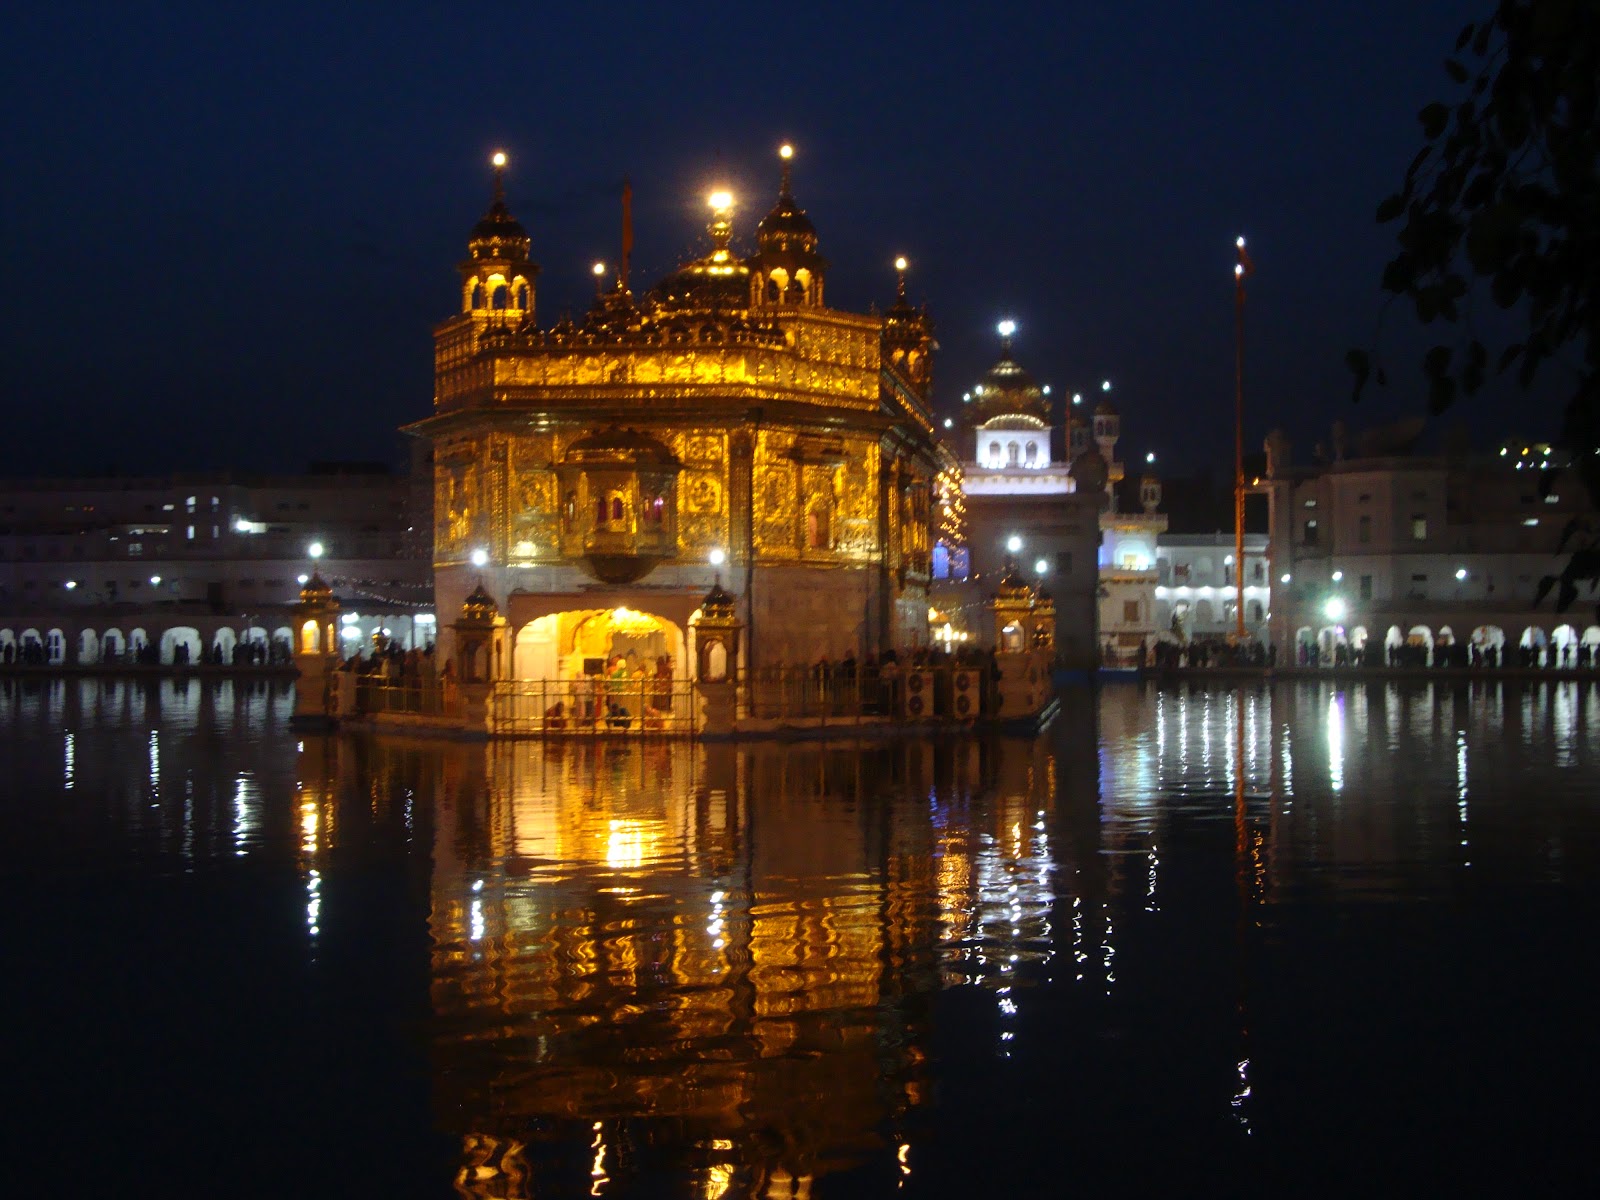 slow train to Singapore: The golden temple, Amritsar